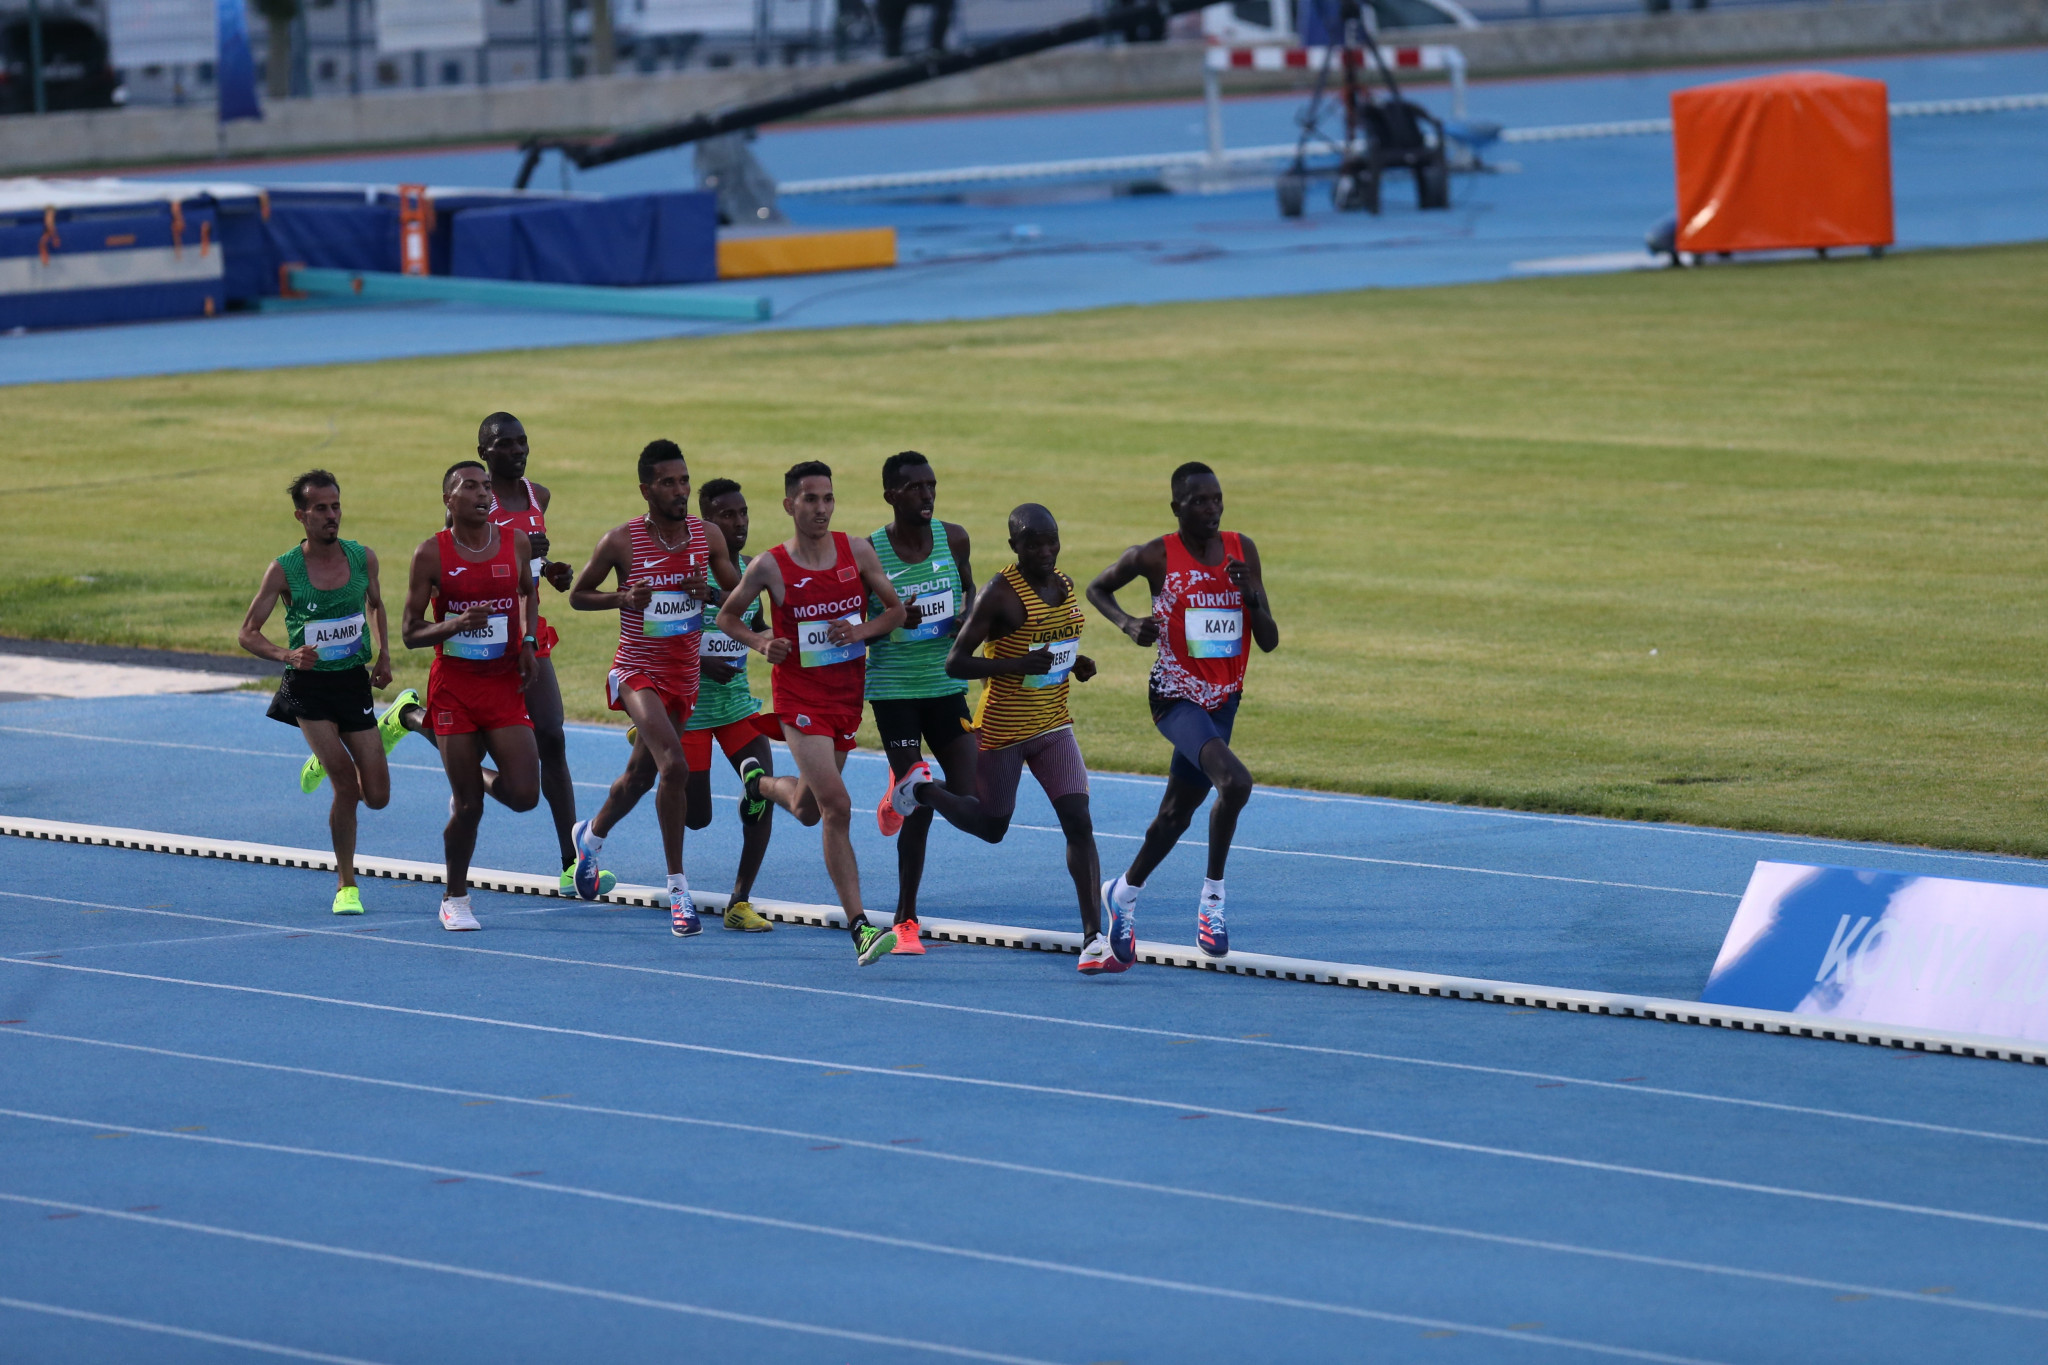 There was a thrilling men's 10,000m final at the Konya Athletic Field ©Konya2021